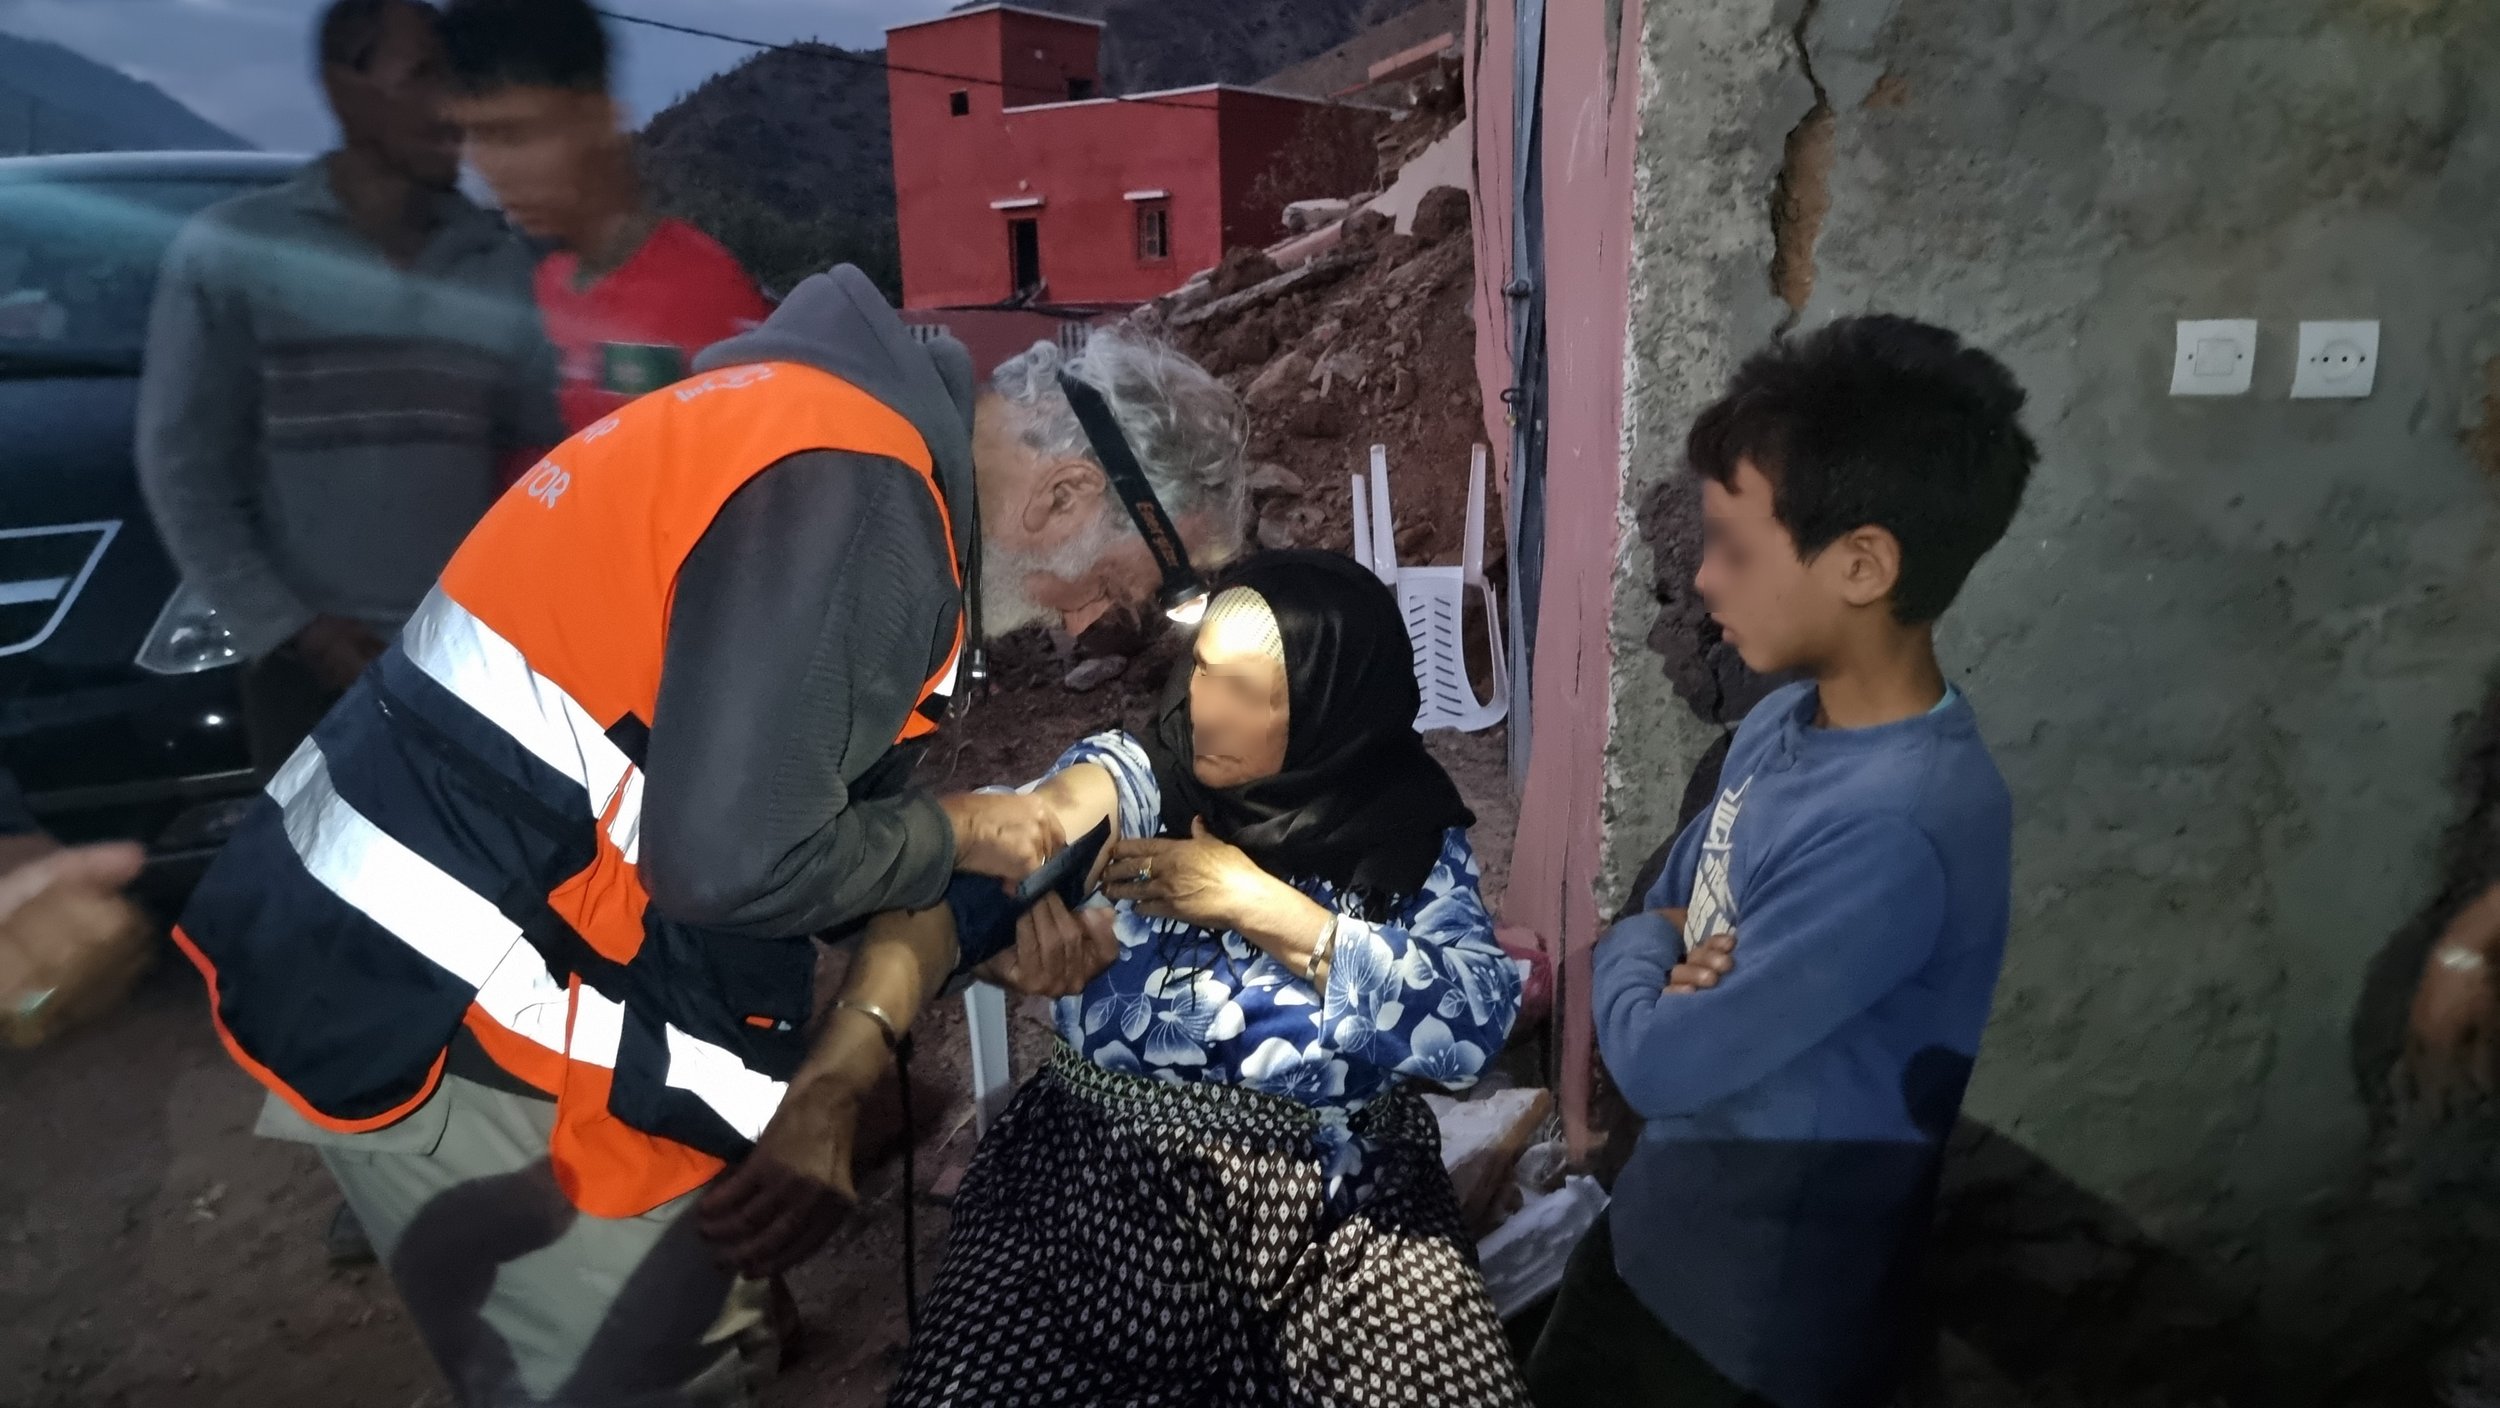 Dr. Mick Alkan treats patients at field clinic. High Atlas Mountains, Morocco, Sept 2023 